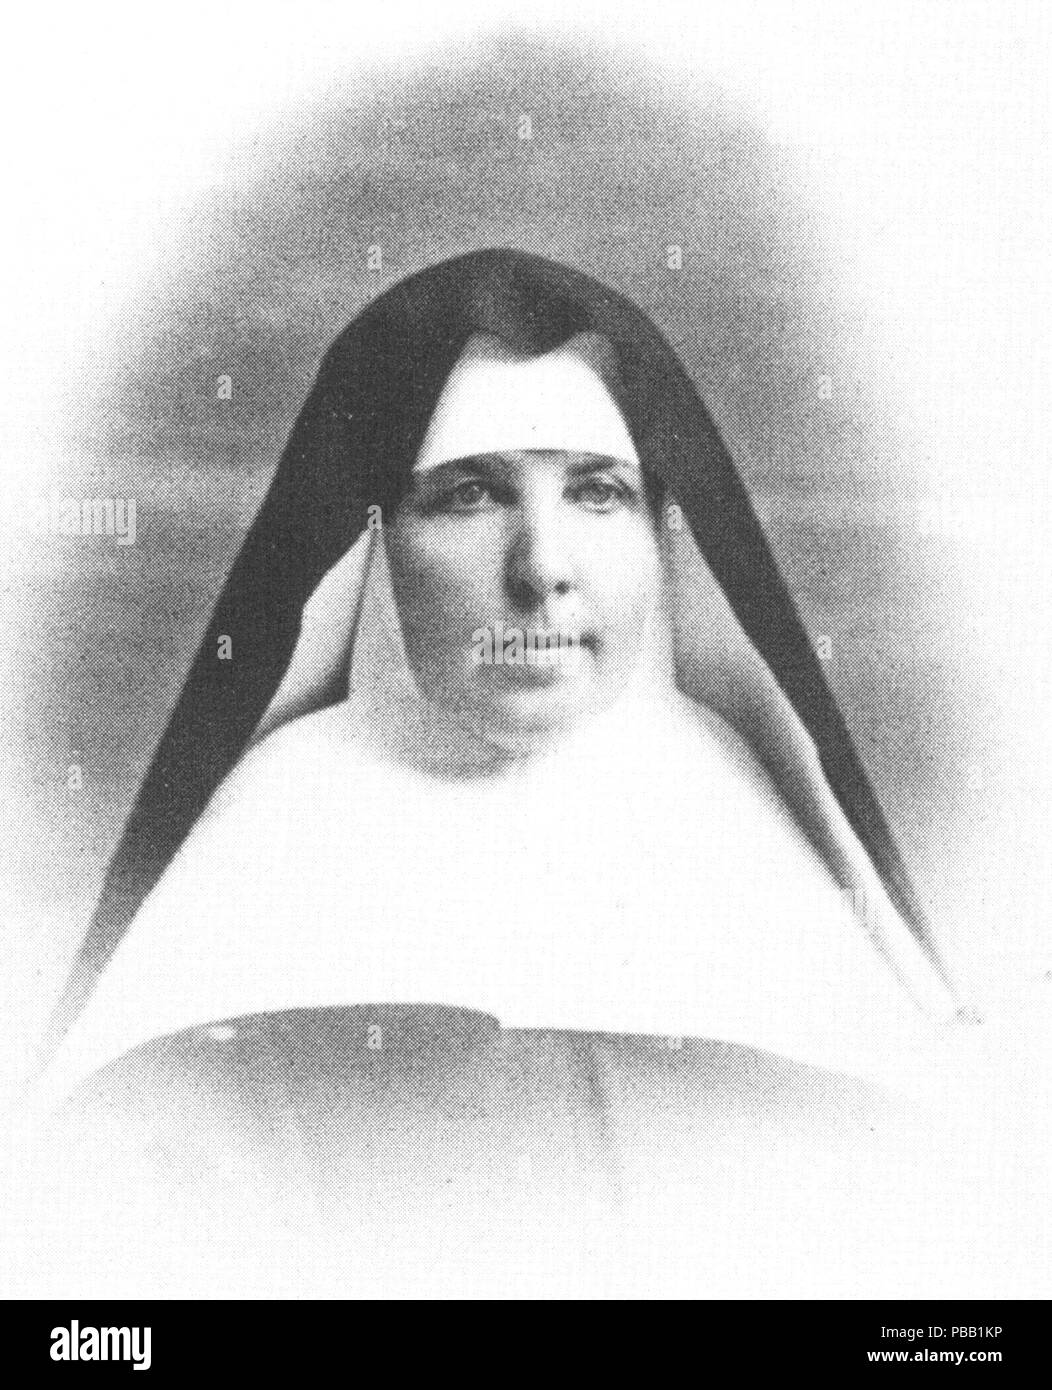 . English: Mother Mary Amadeus Dunne, an Ursuline nun, as photographed between January and October 1884. She was born Sarah Theresa Dunne on July 2, 1846, in Akron, Ohio, to Irish immigrants John and Ellen Dunne, and was their fifth child. (Her eldest brother was Judge Edmund Dunne.) An accidental poisoning as a child left her with asthma and various health issues. In 1856, her family moved to California as part of the gold rush. She and her older sister, Mary, were left behind as students at an Ursuline boarding school. She entered the Ursuline convent in Toledo, Ohio, in 1861. Dunne took vow Stock Photo